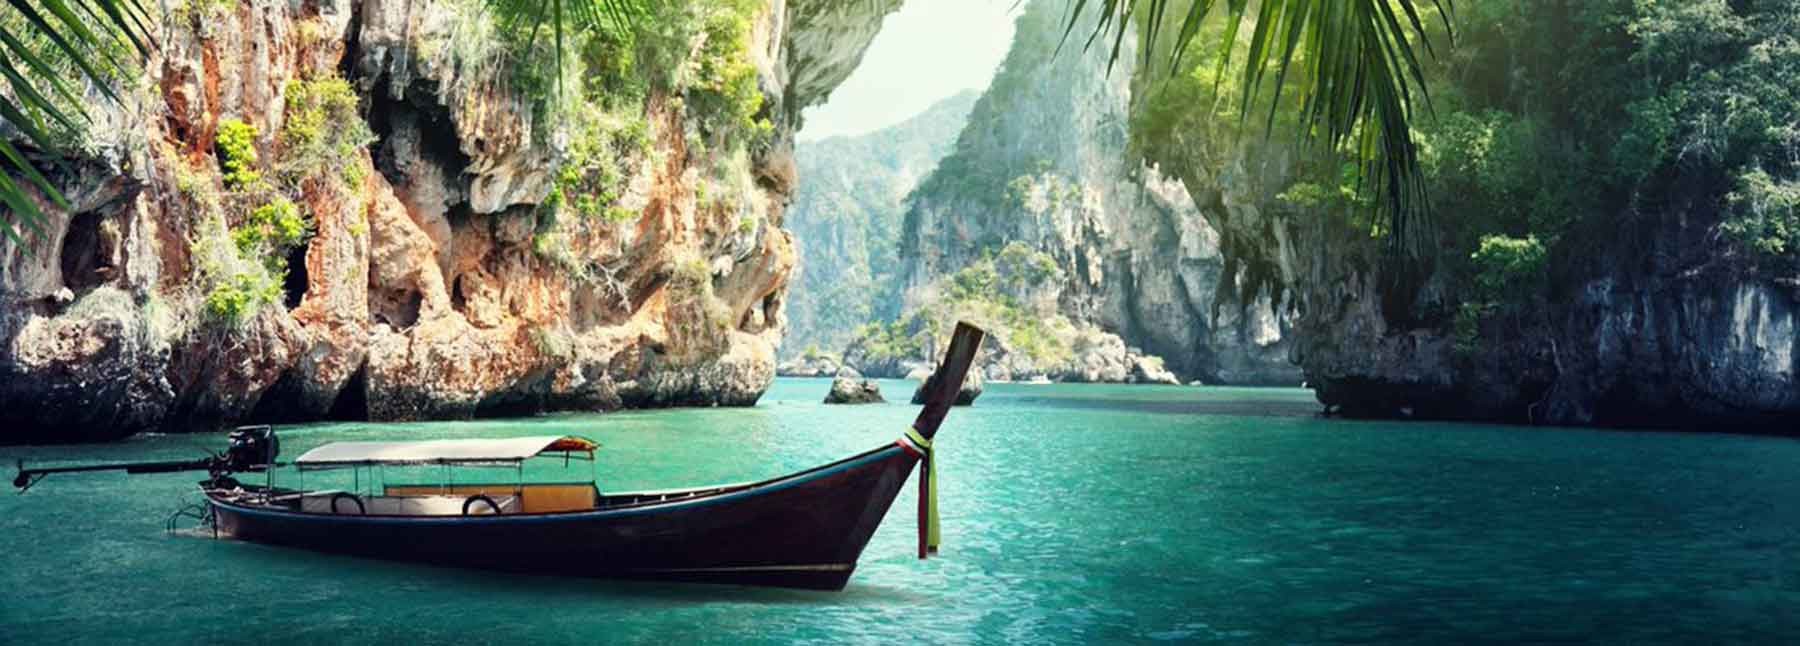 FOR THE LOVE OF AMAZING THAILAND